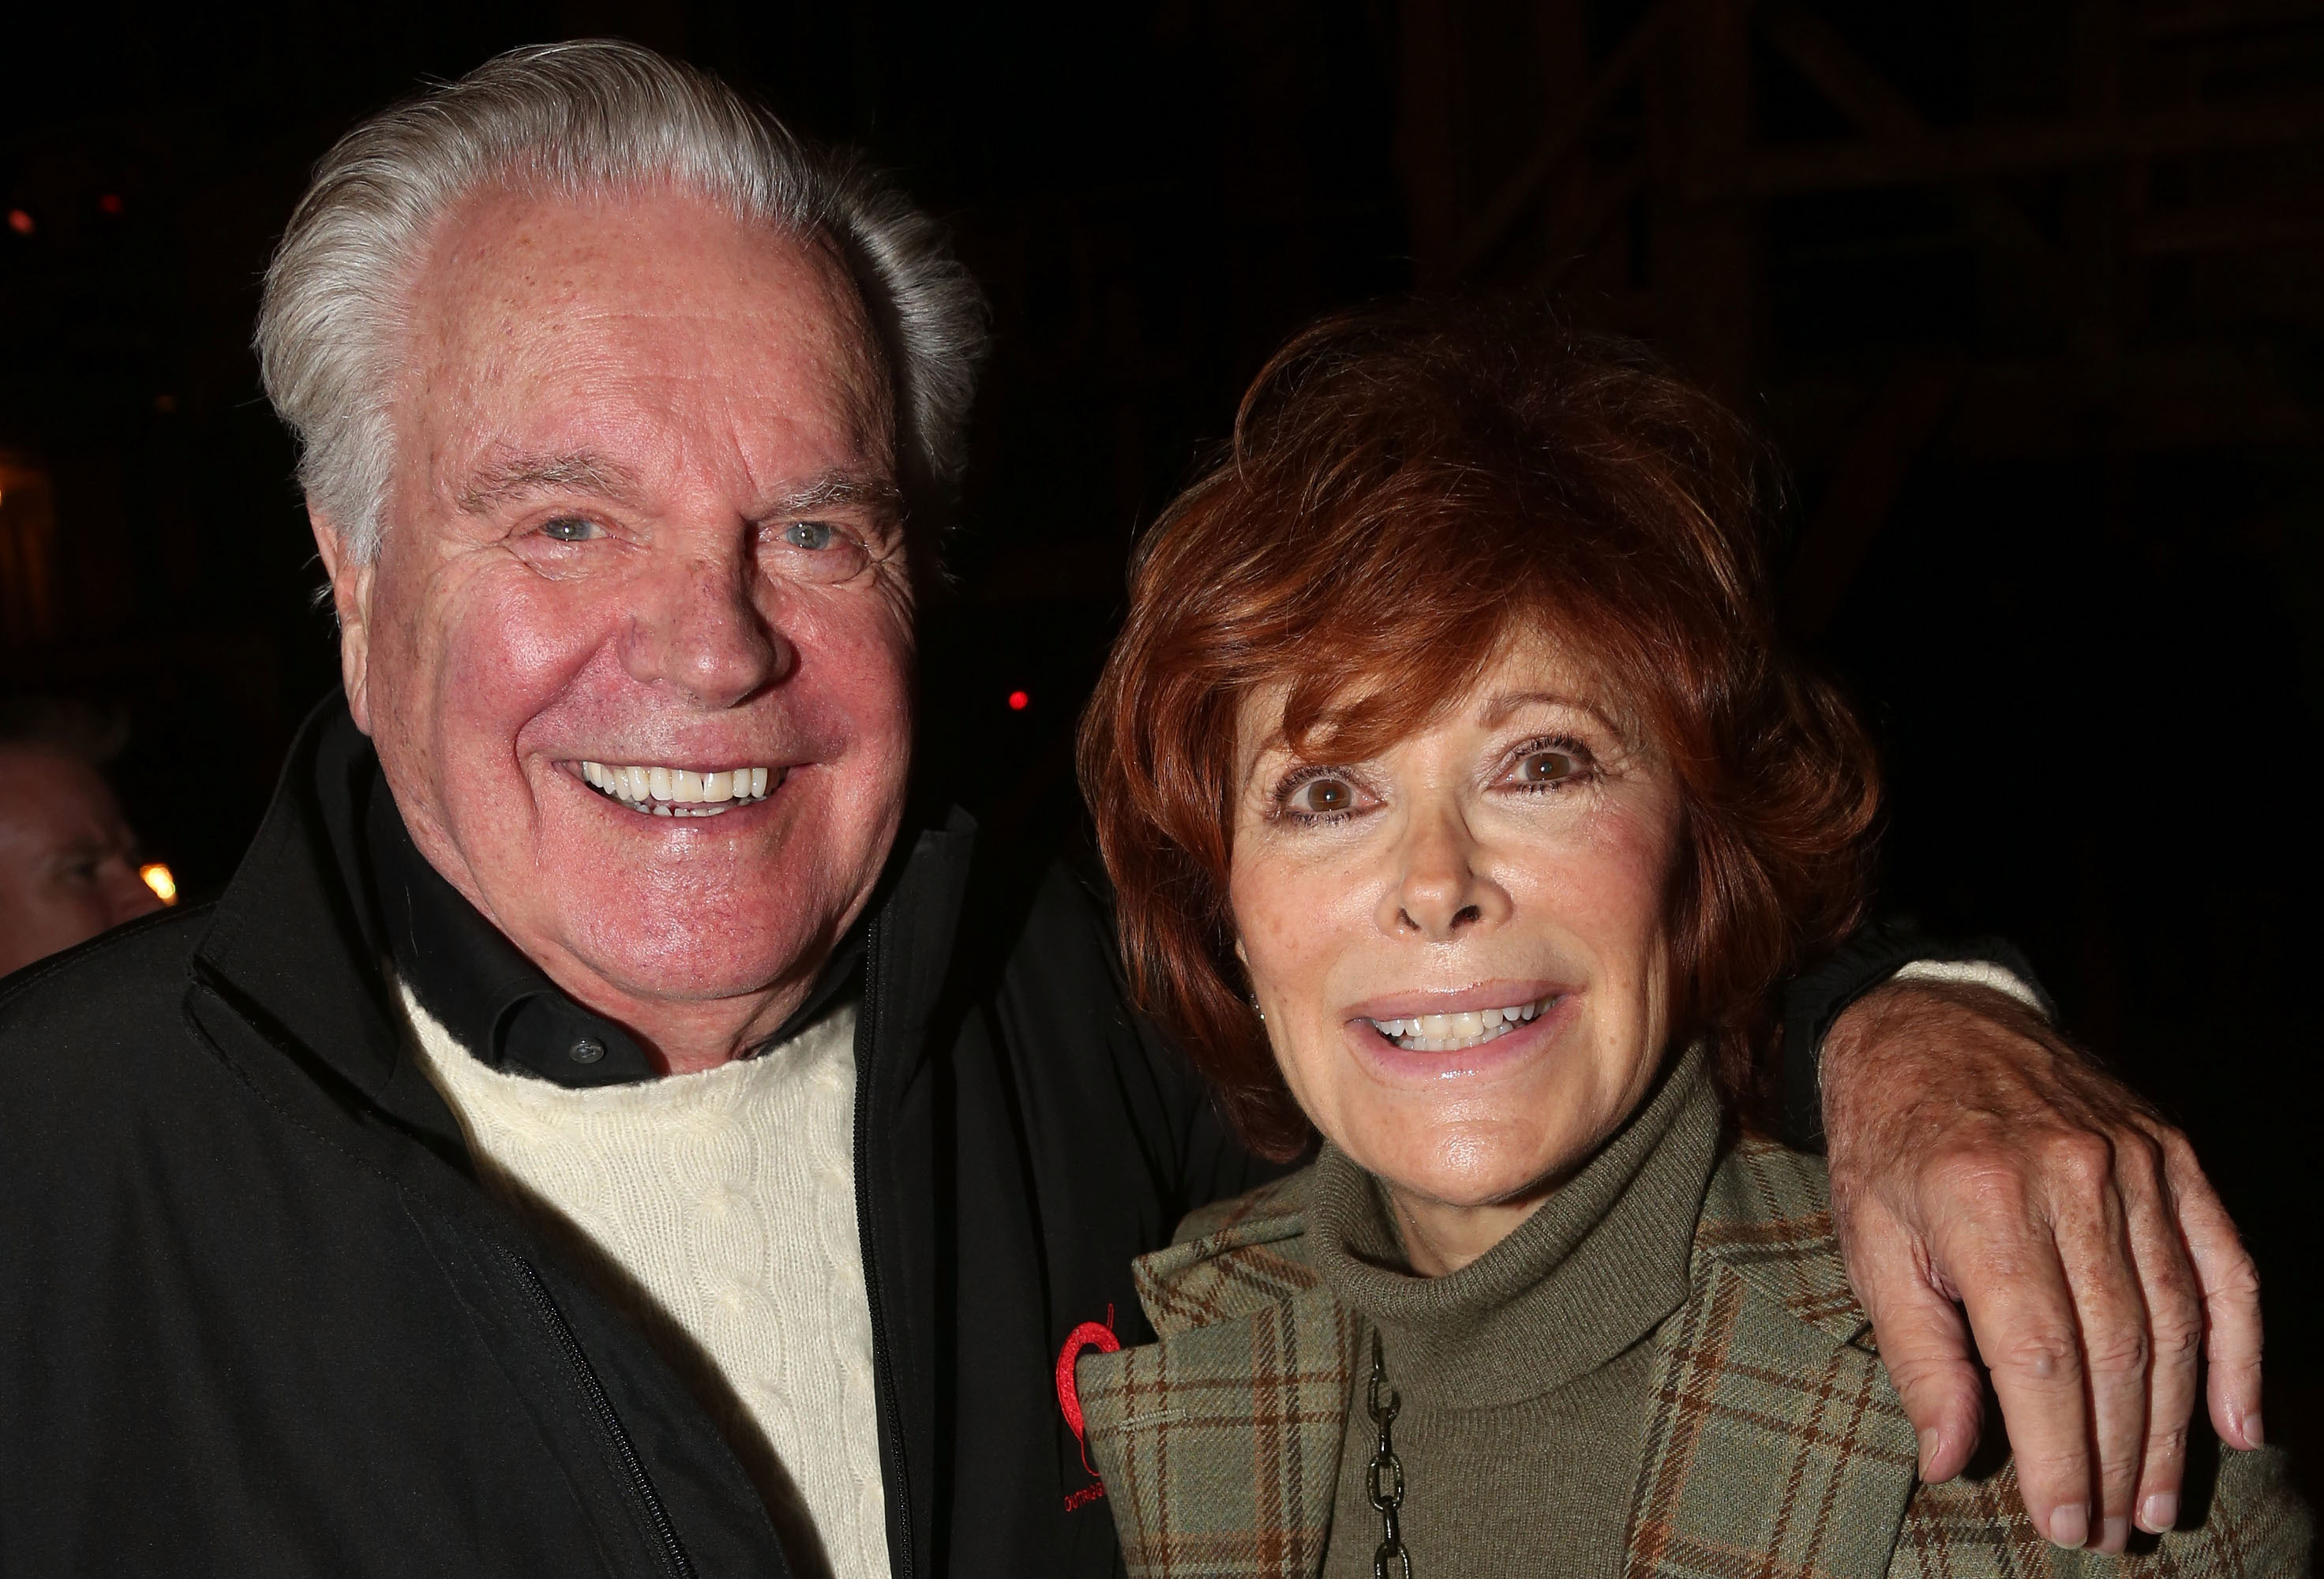 Robert Wagner and Jill St. John in New York City on October 28, 2015 | Source: Getty Images